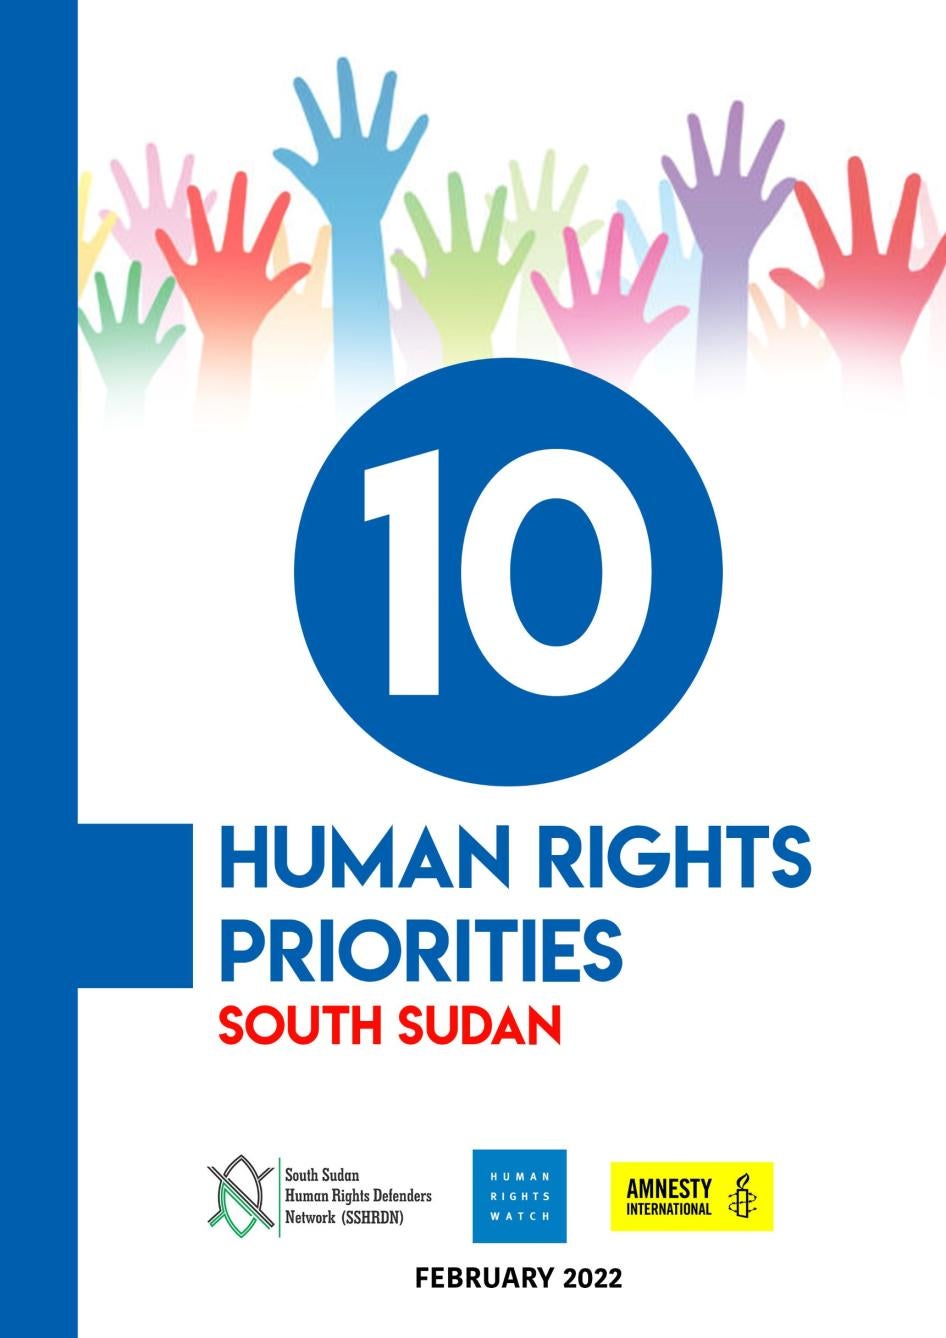 10 Human Rights Priorities for South Sudan